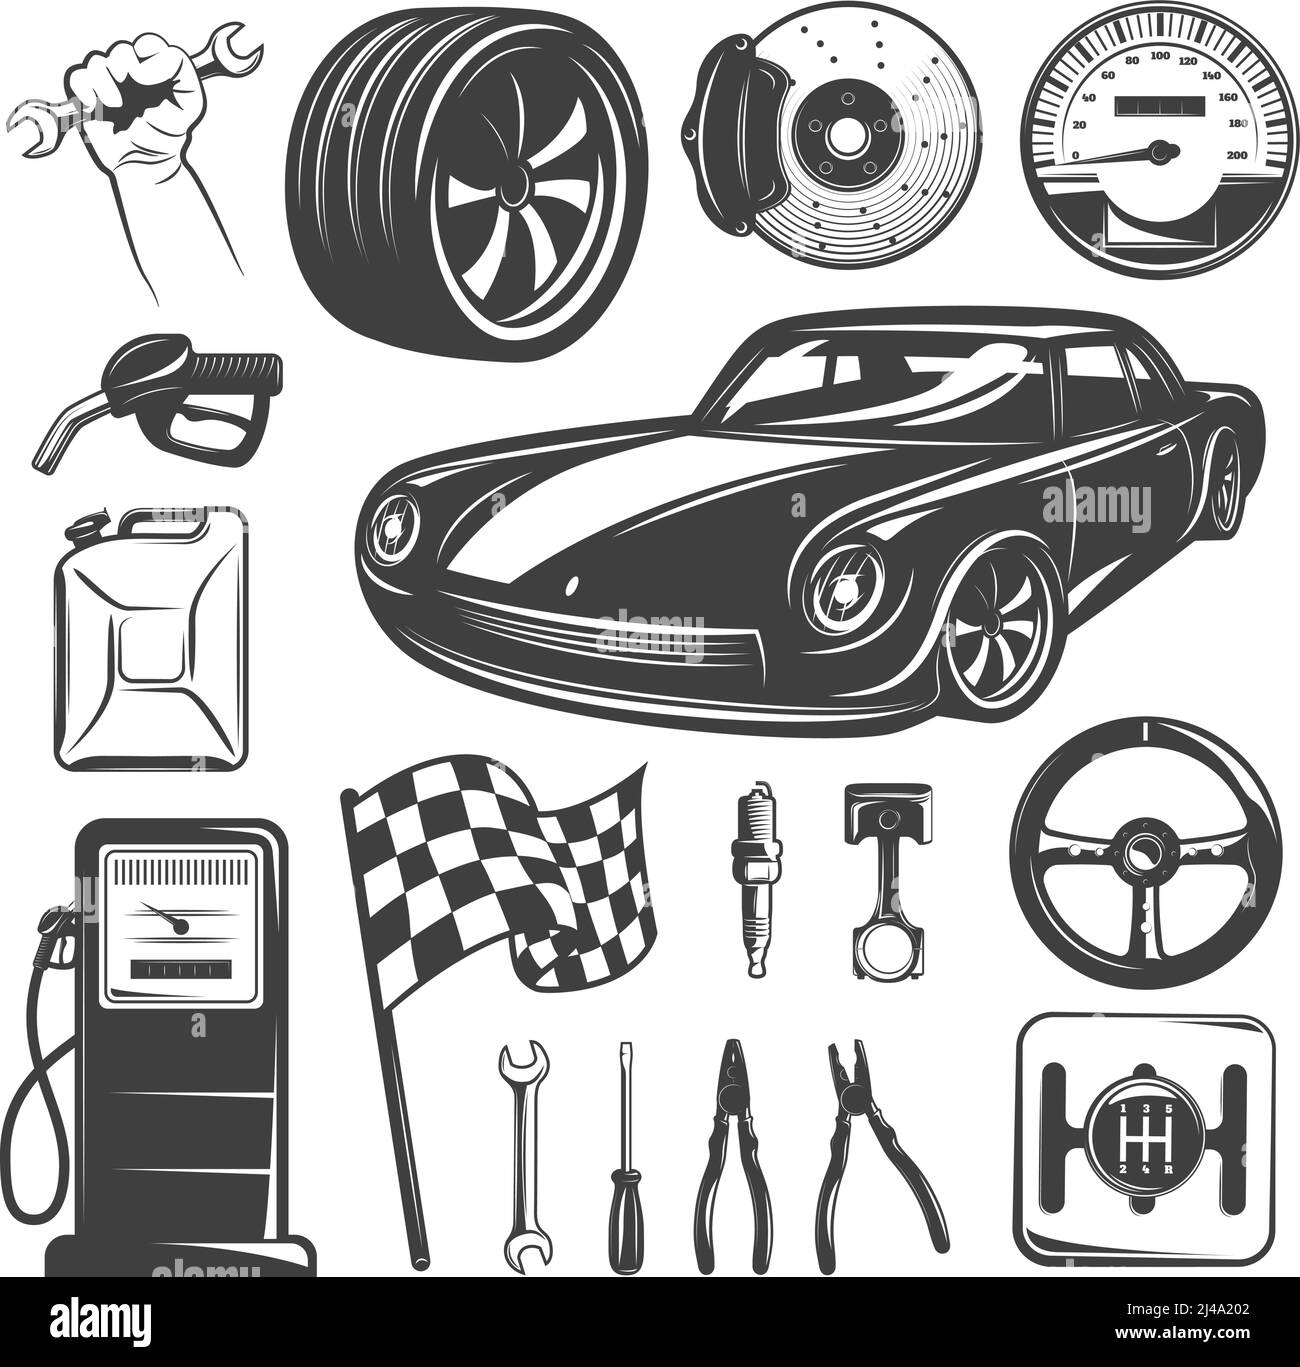 Car repair garage black isolated icon set with tools accessories